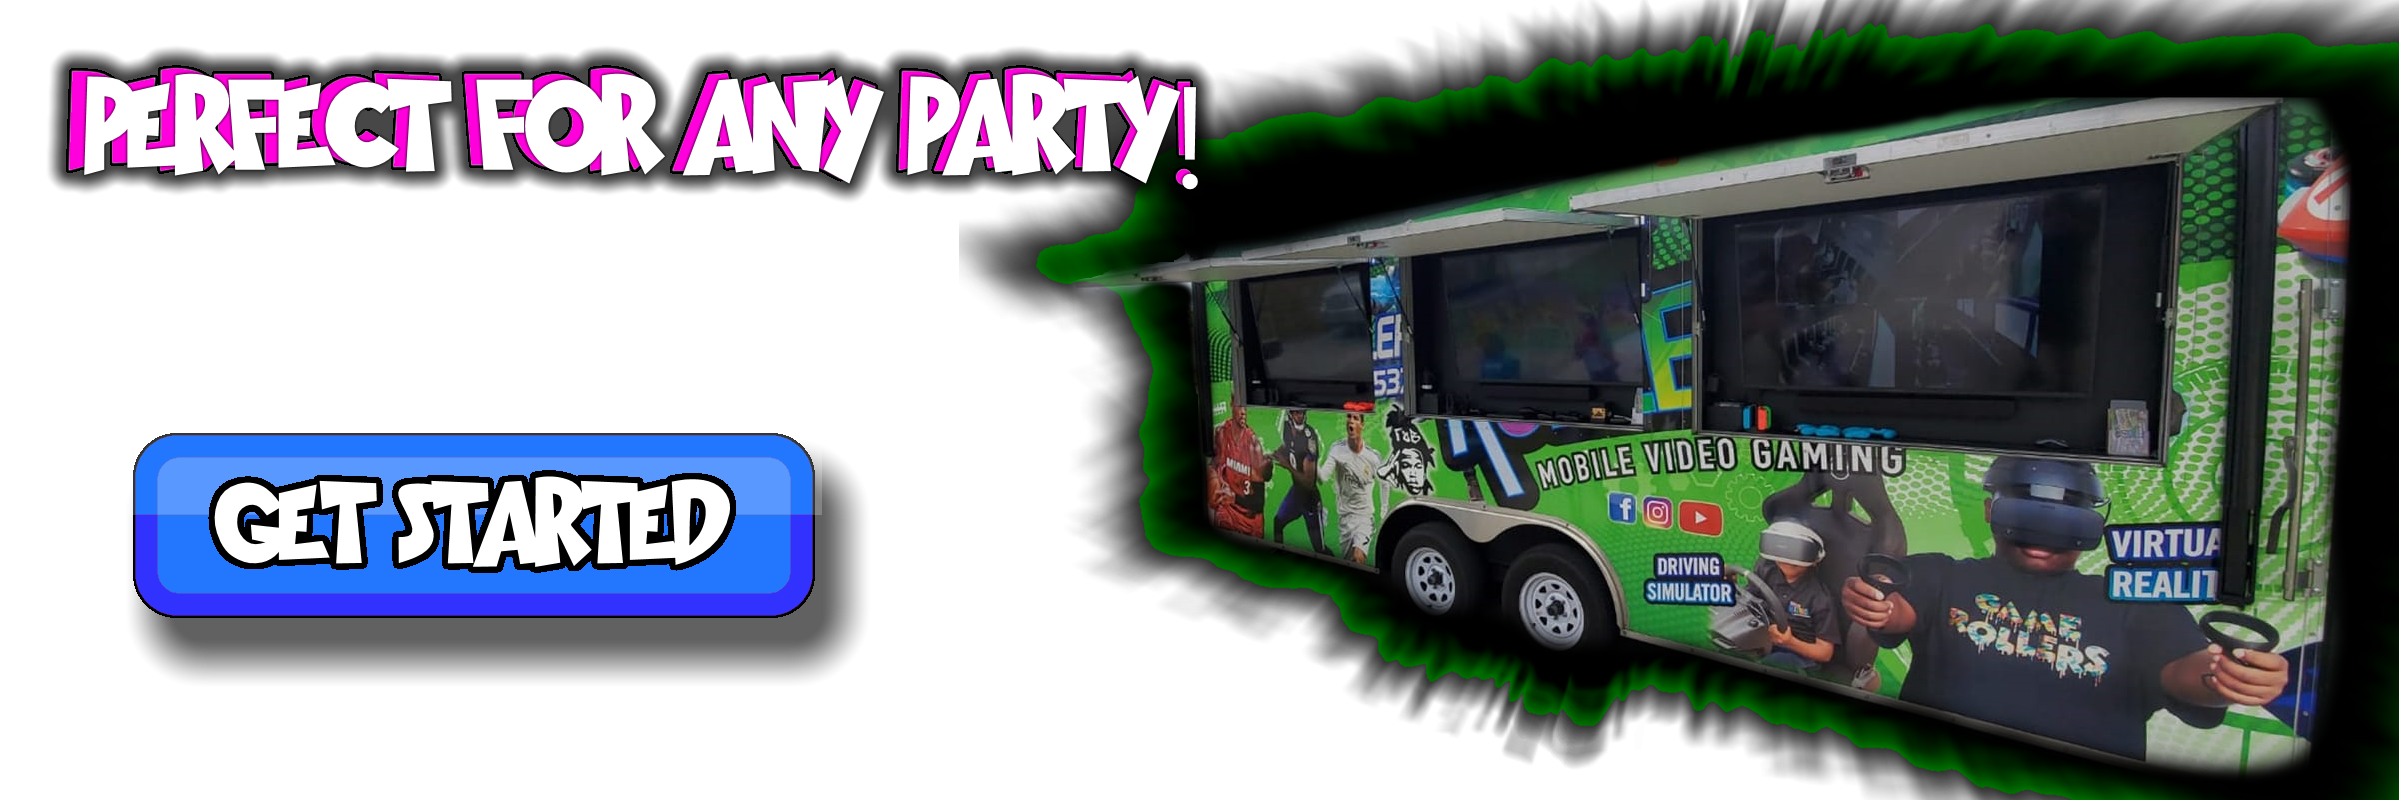 Get Started On Your Mobile Video Game Party!